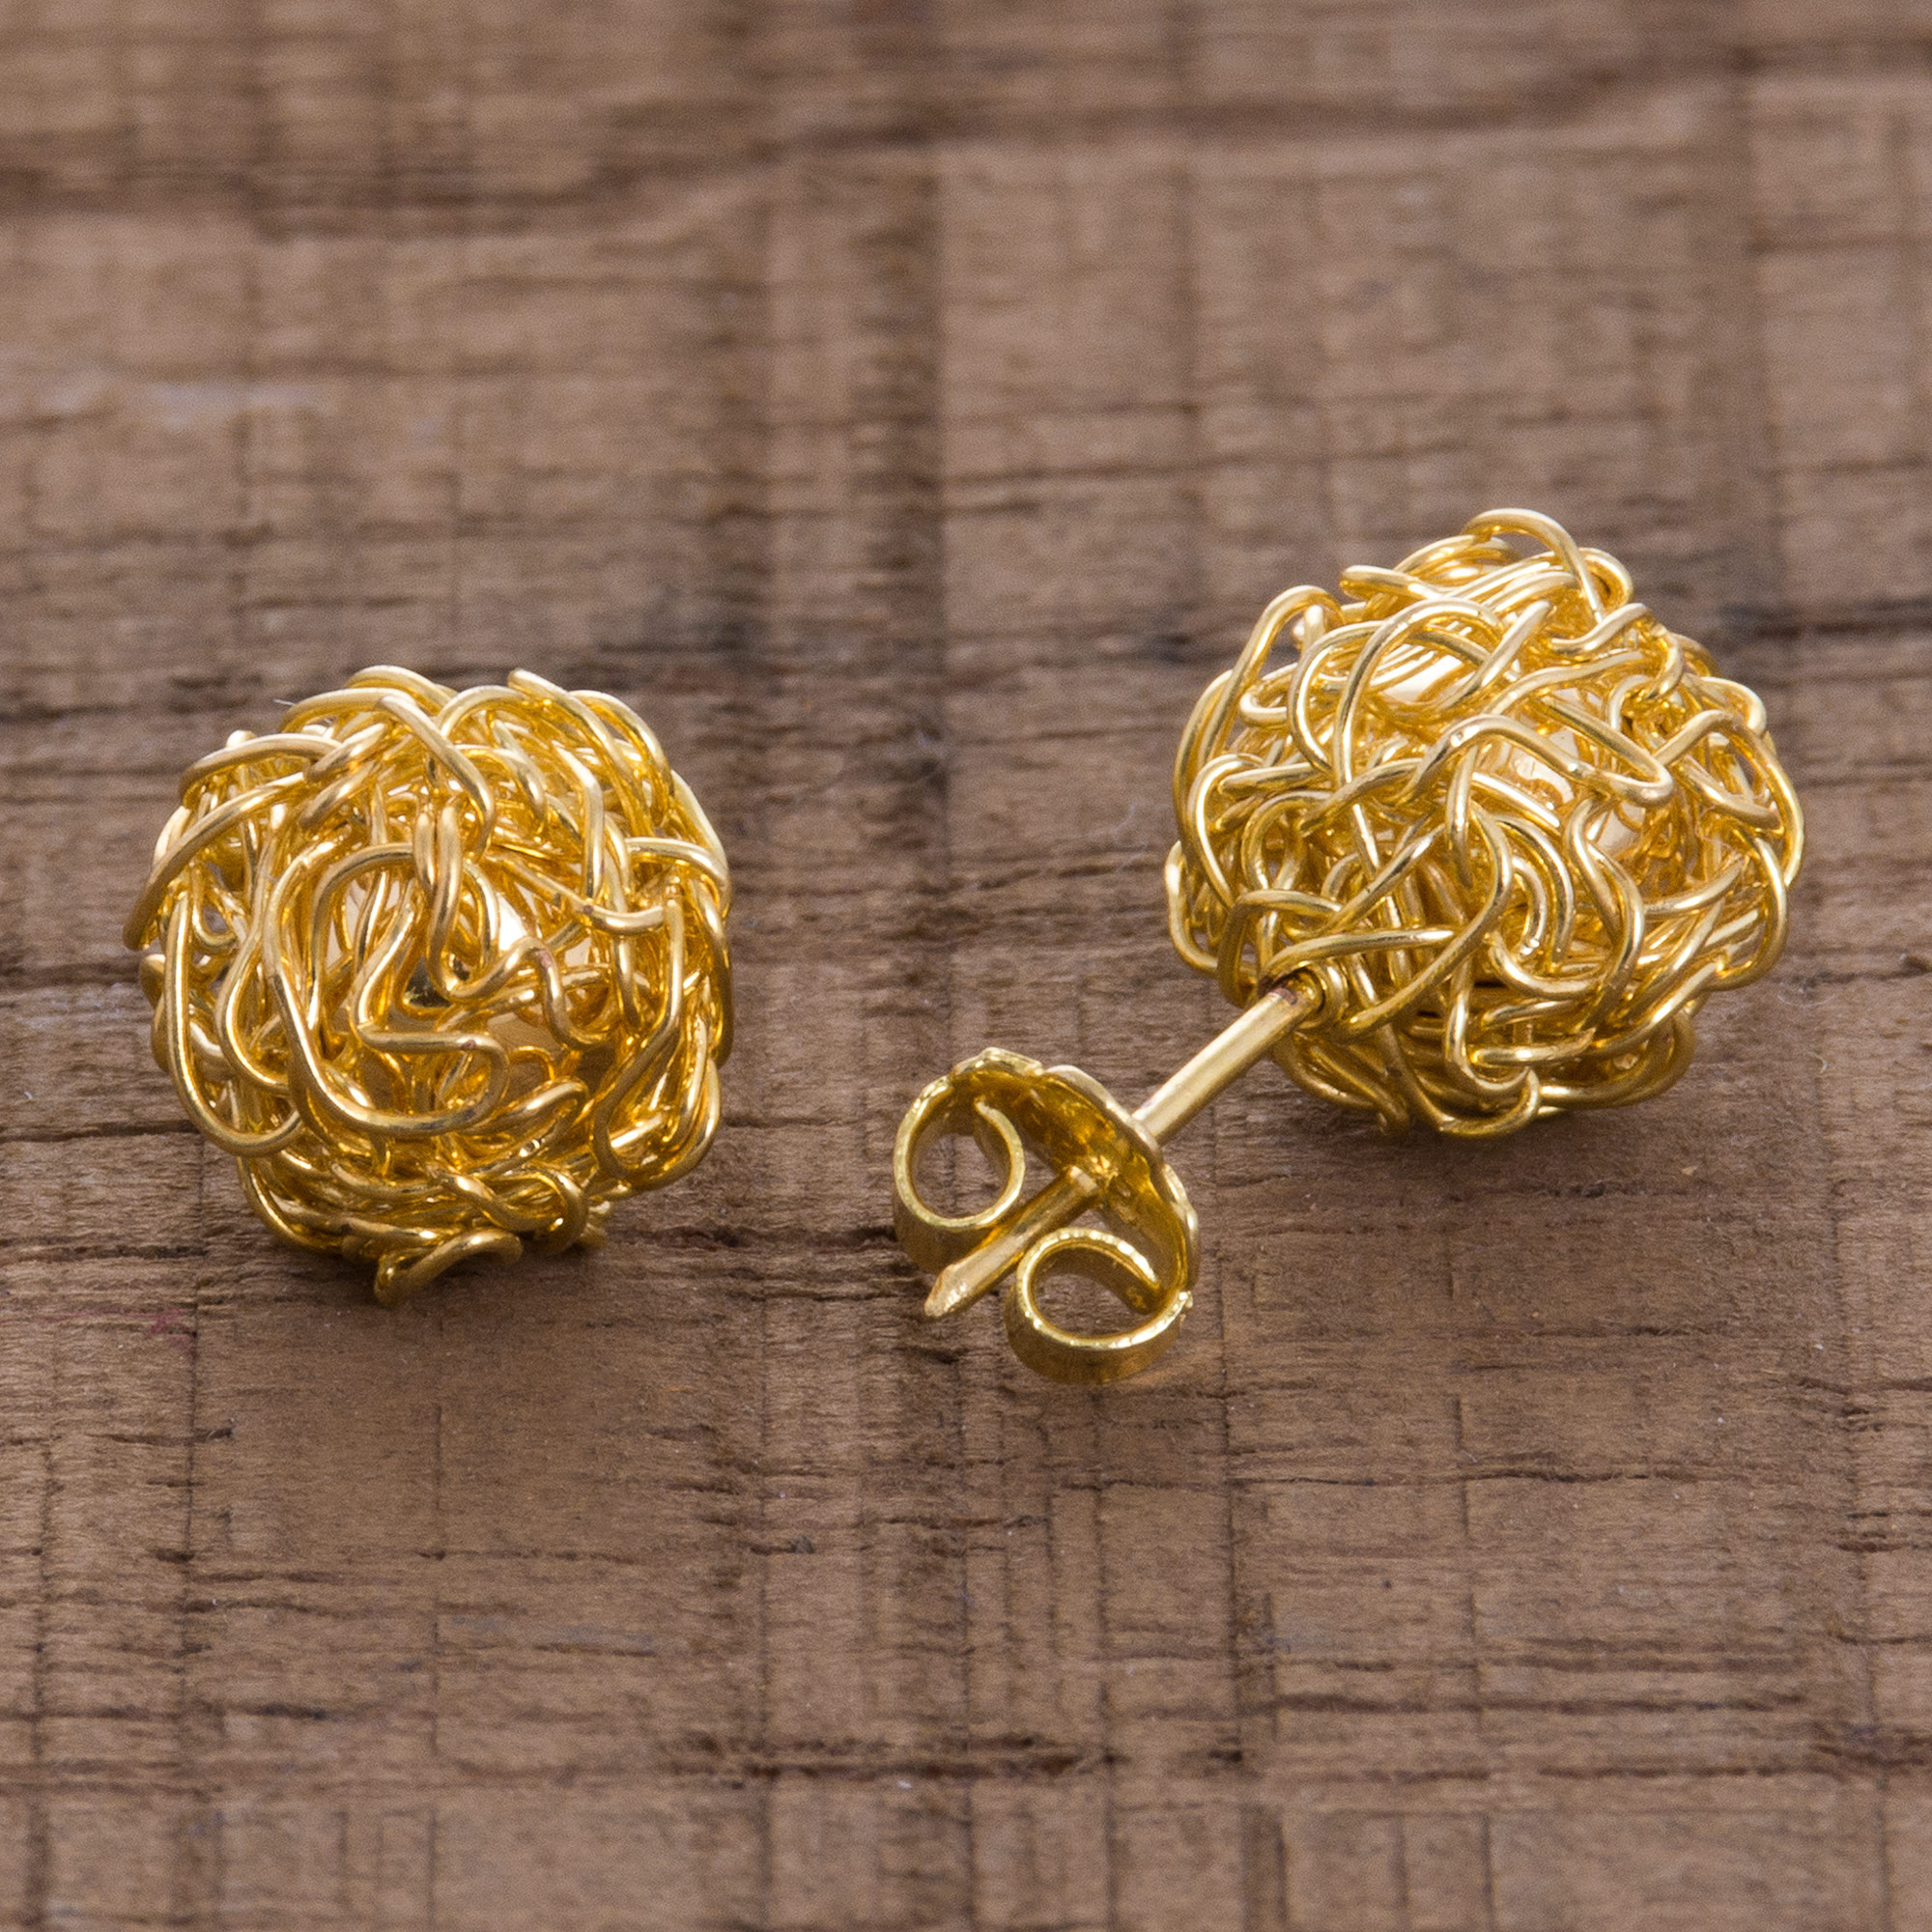 18k Gold Plated Sterling Silver Stud Earrings from Peru - Golden Nests ...